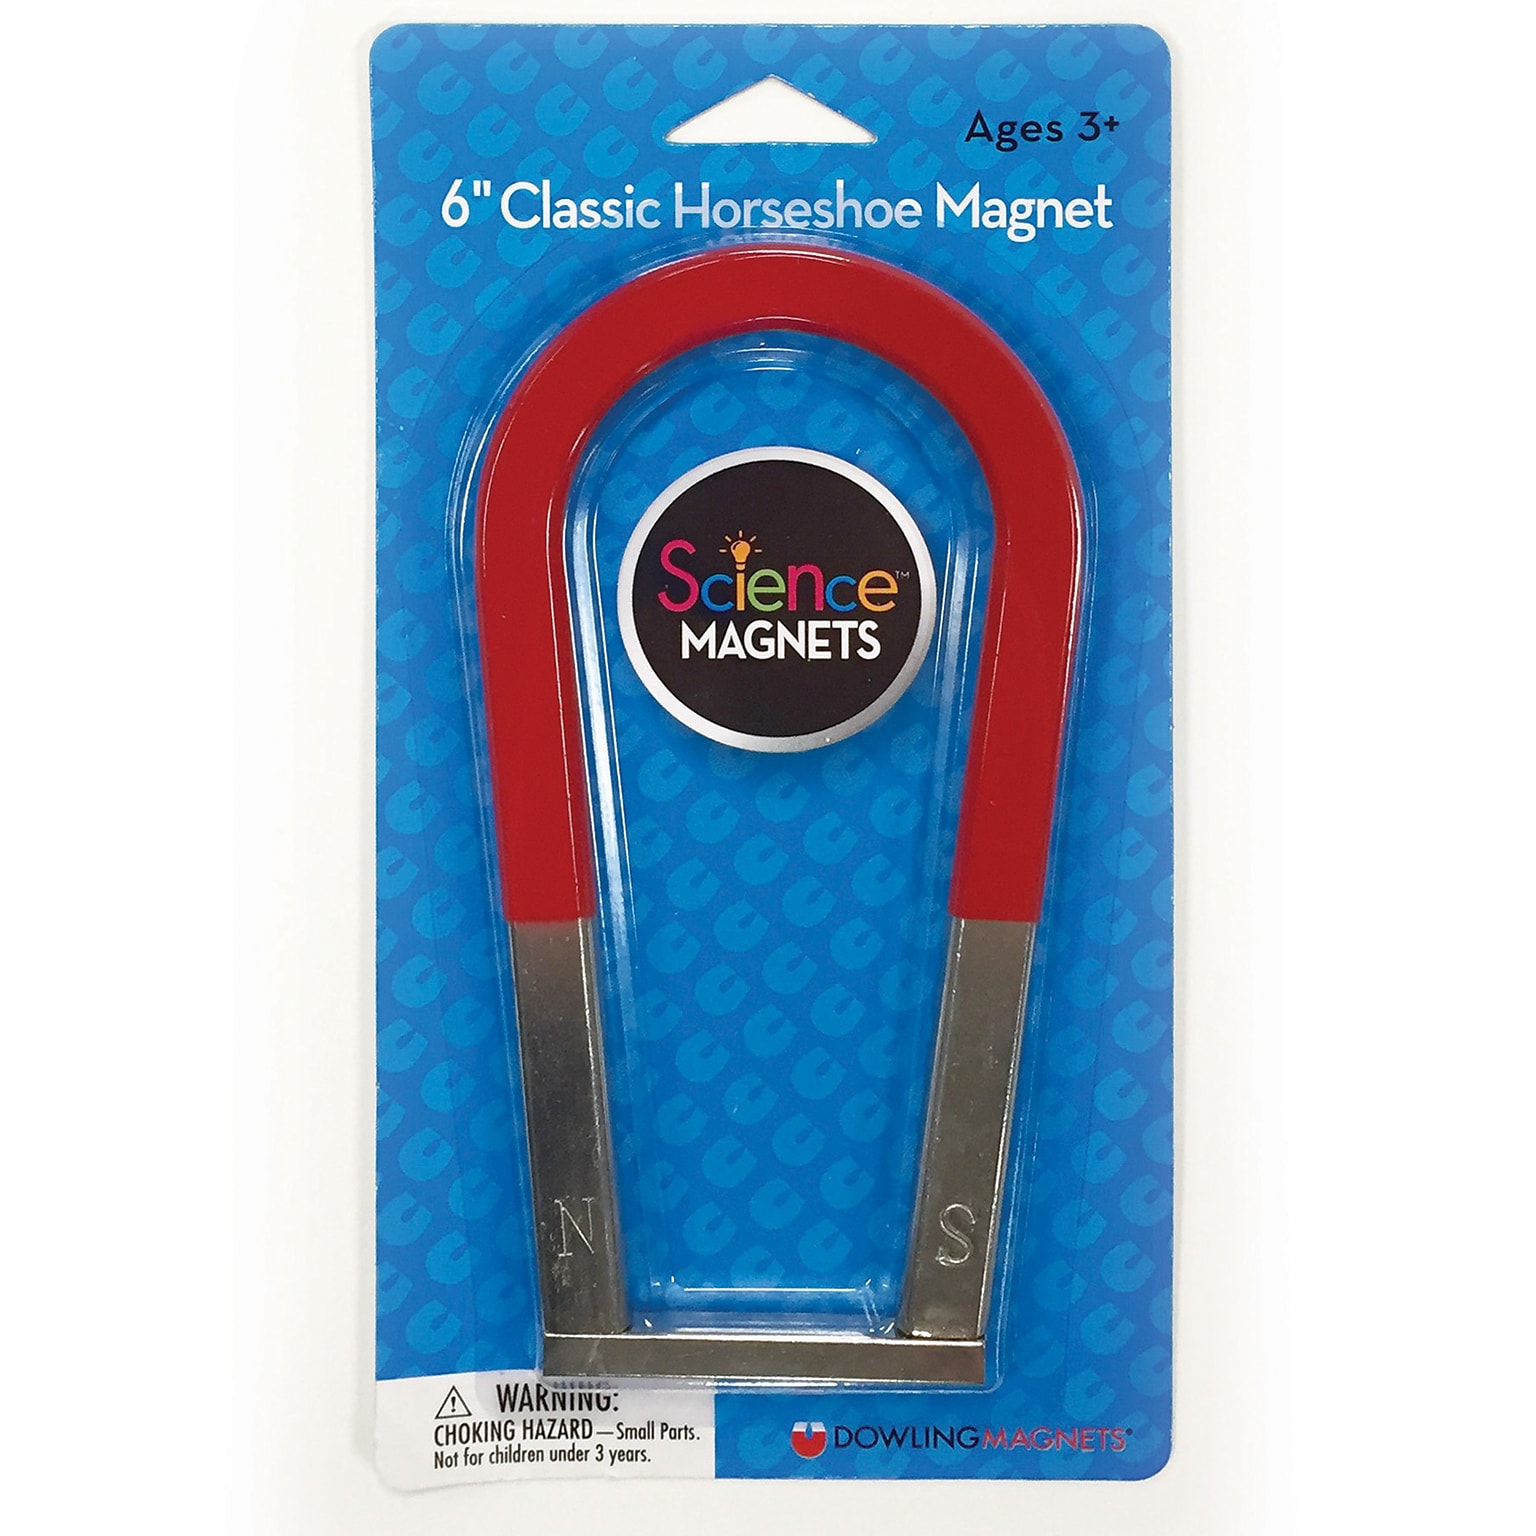 Dowling Magnets Classic Horseshoe Science Magnet, 6